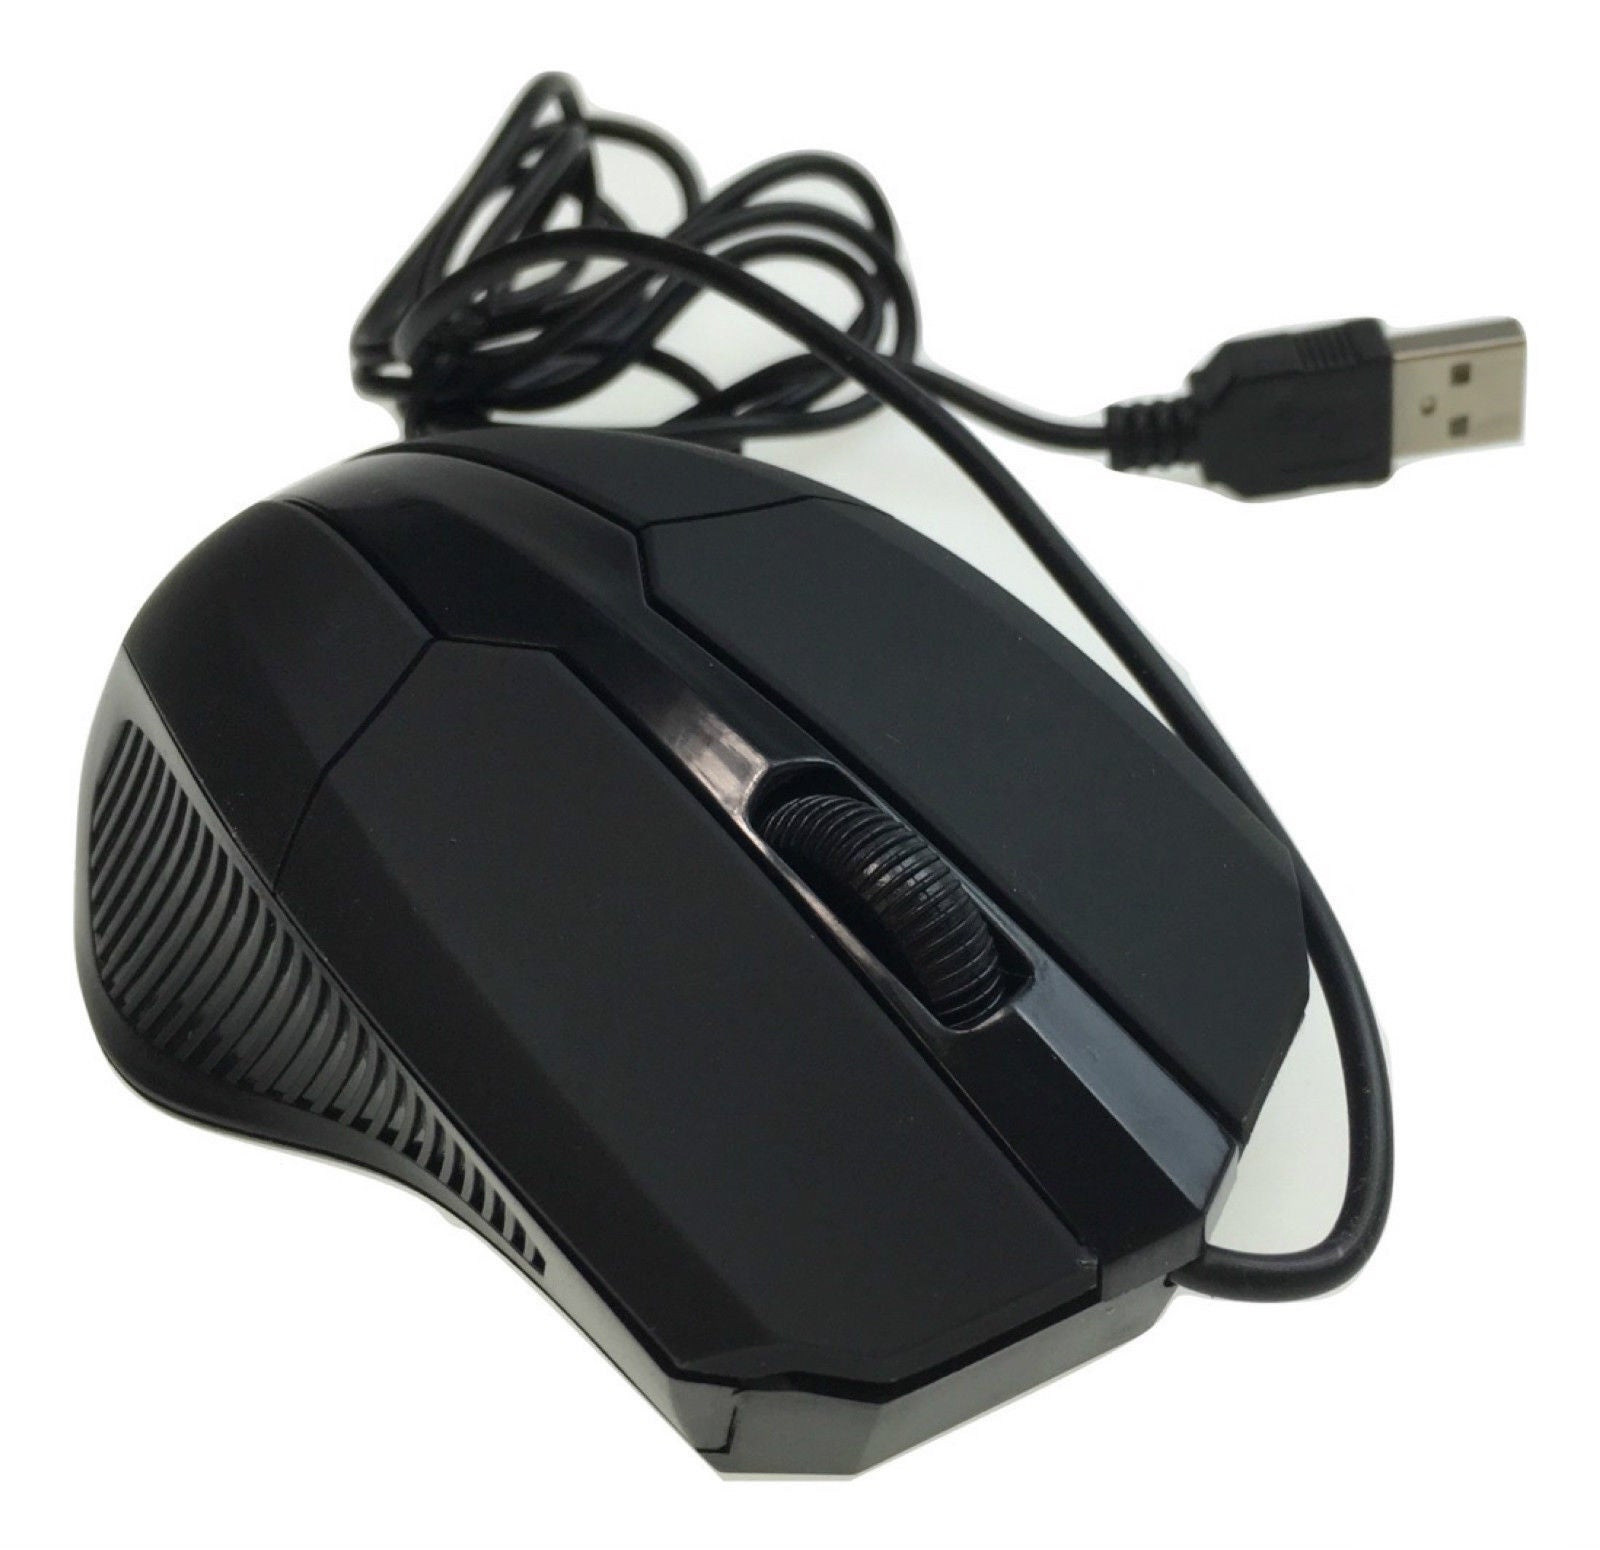 WIRED USB OPTICAL MOUSE Gaming PC LED Mice Computer Laptop 3 Button 1000 DPI